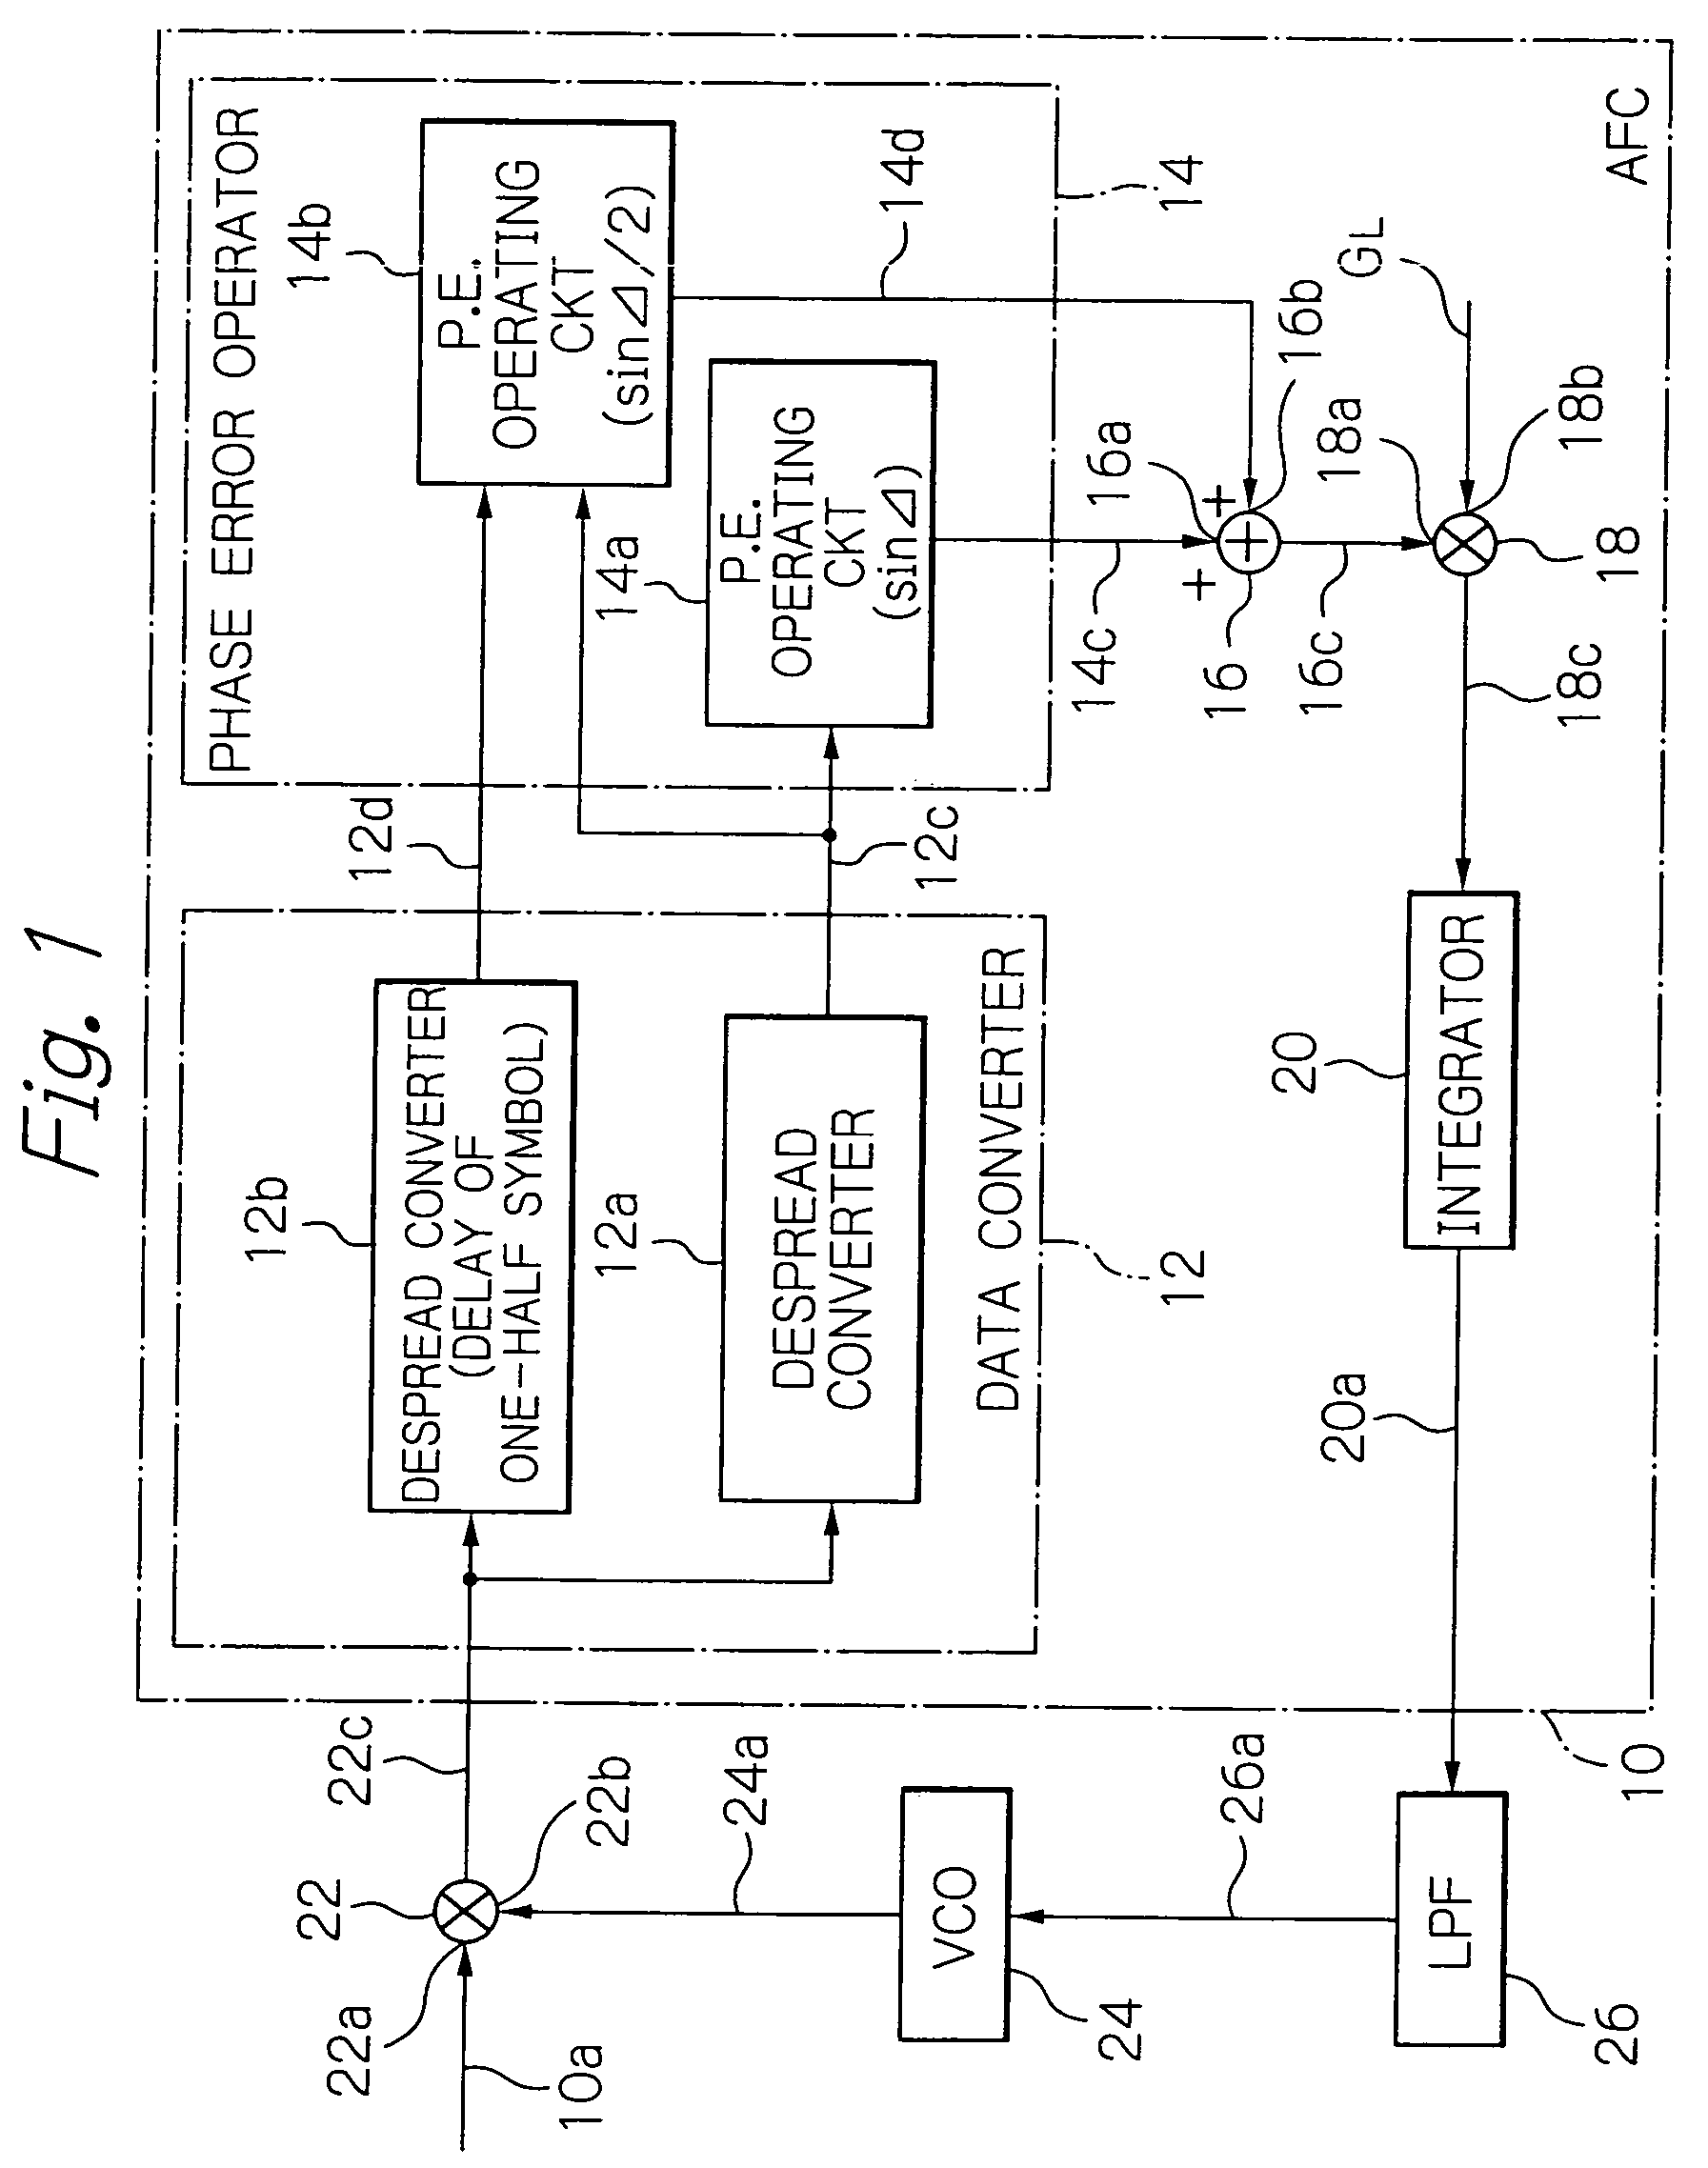 Apparatus for controlling the frequency of received signals to a predetermined frequency